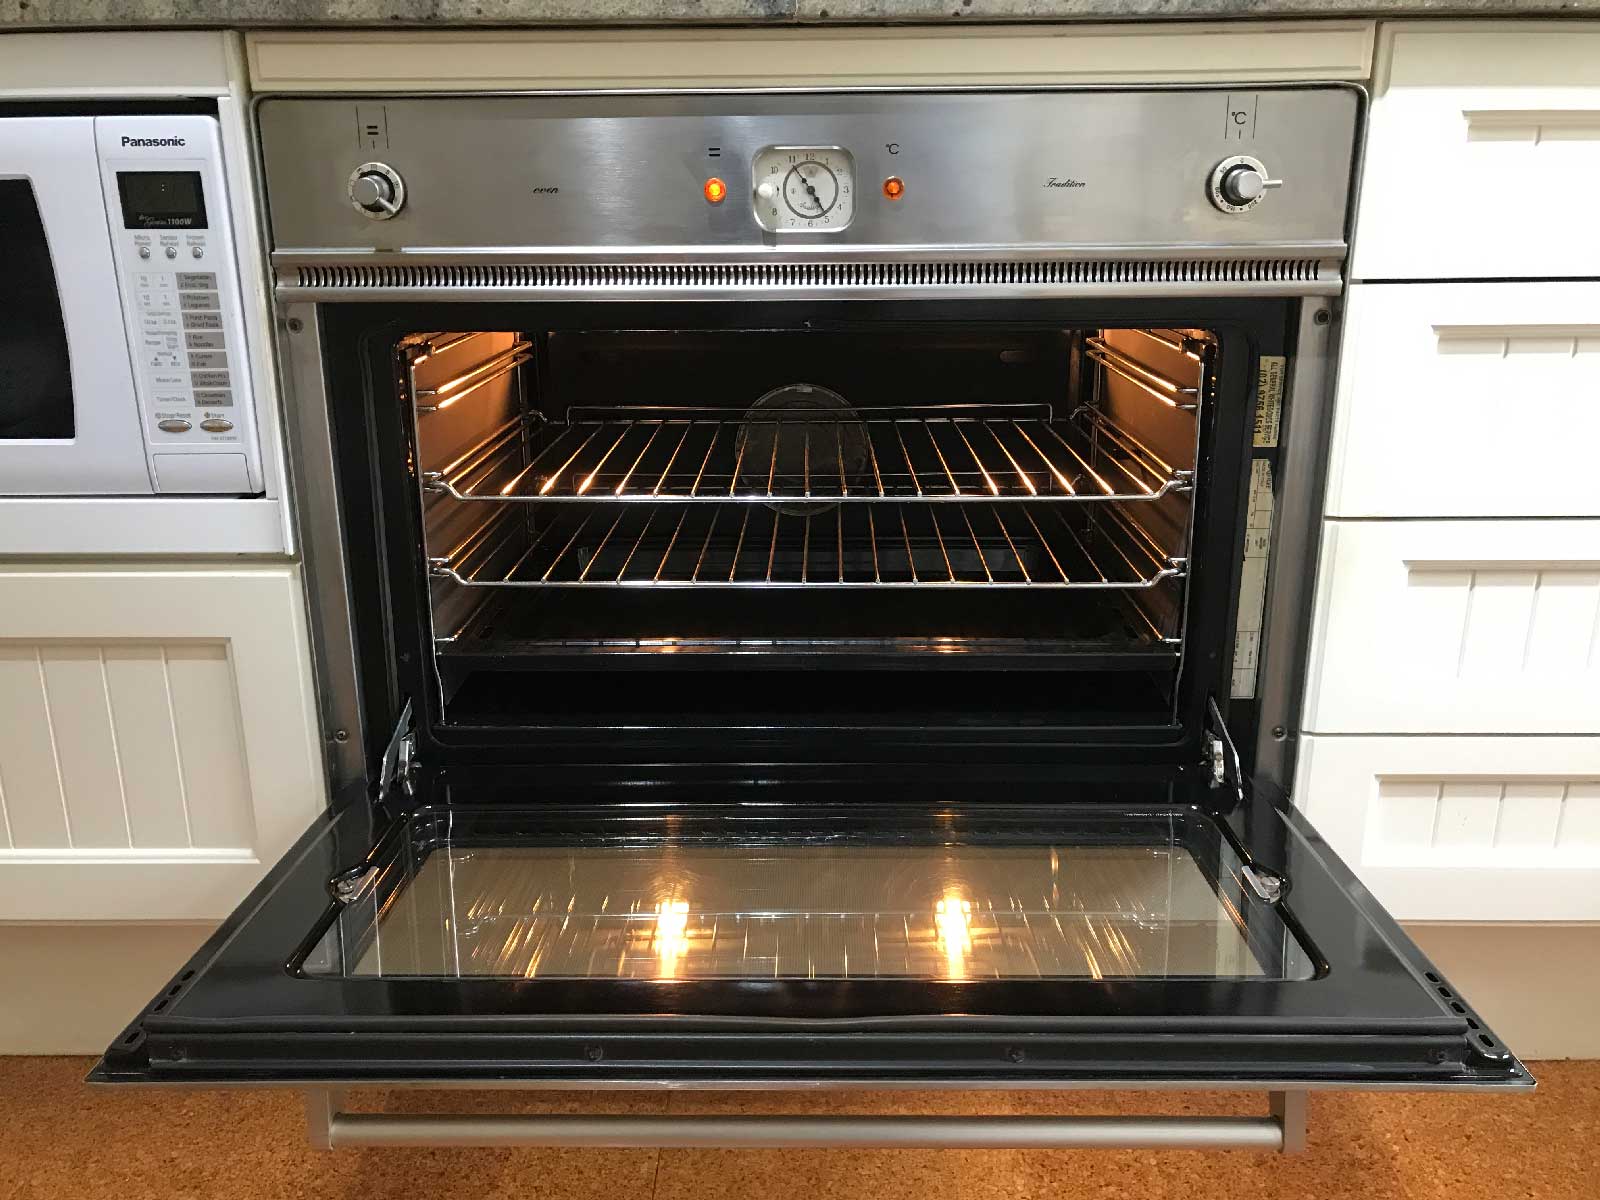 https://www.ovenrestore.com.au/wp-content/uploads/2020/03/or-20200327-0757-marble-top-oven-now-sparkling-clean-oven-restore-1200p-fb.jpg